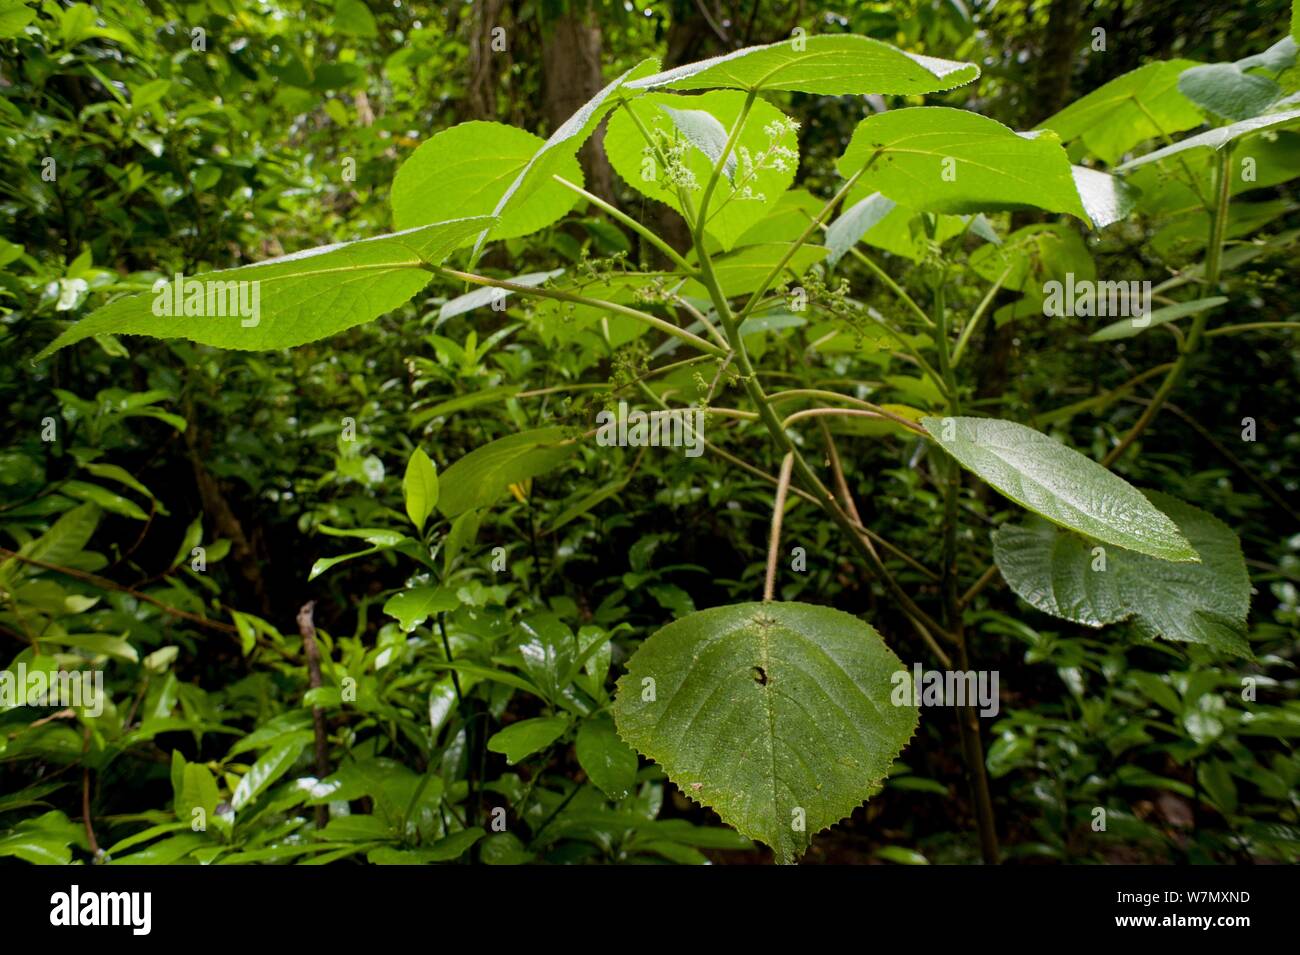 The stinging tree / Gympie-Gympie (Dendrocnide moroides) in rainforest, Tolga, Atherton Highlands, Queensland, Australia. One of the world most venomous plants which can cause months of excruciating pain. Stock Photo